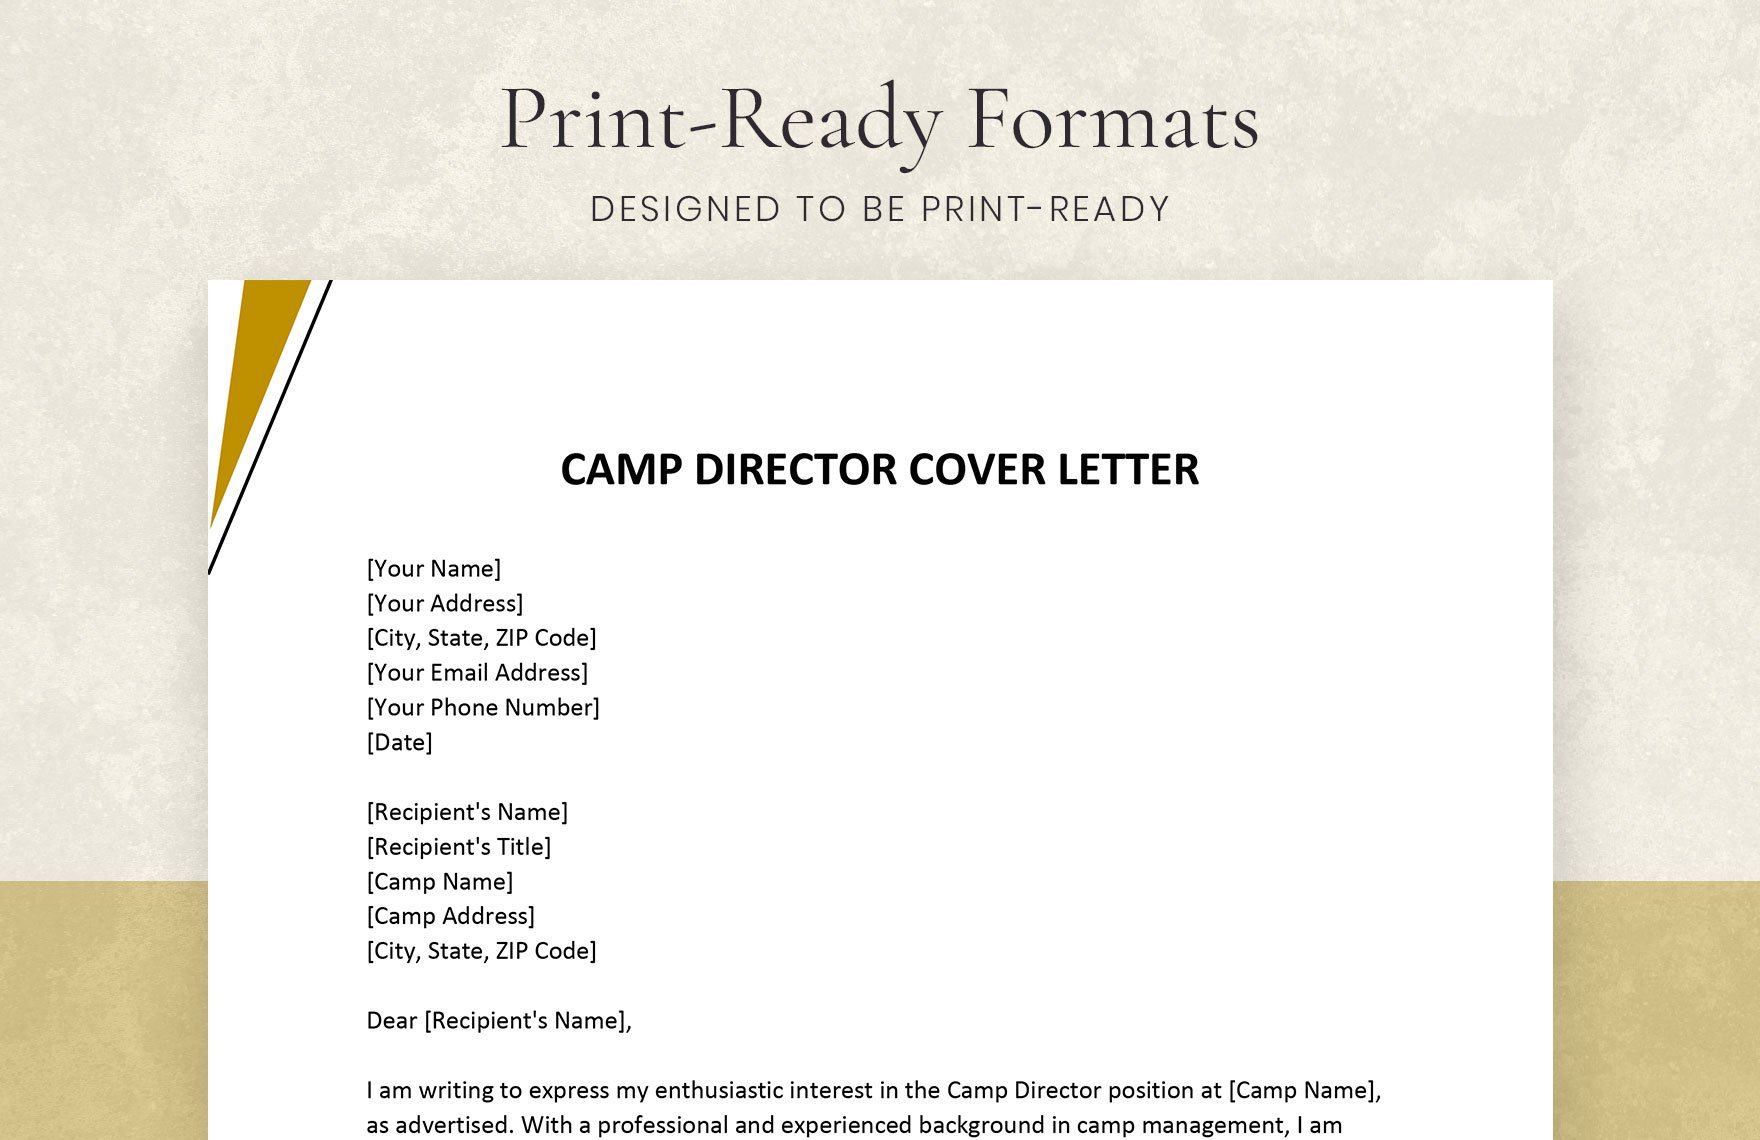 Camp Director Cover Letter